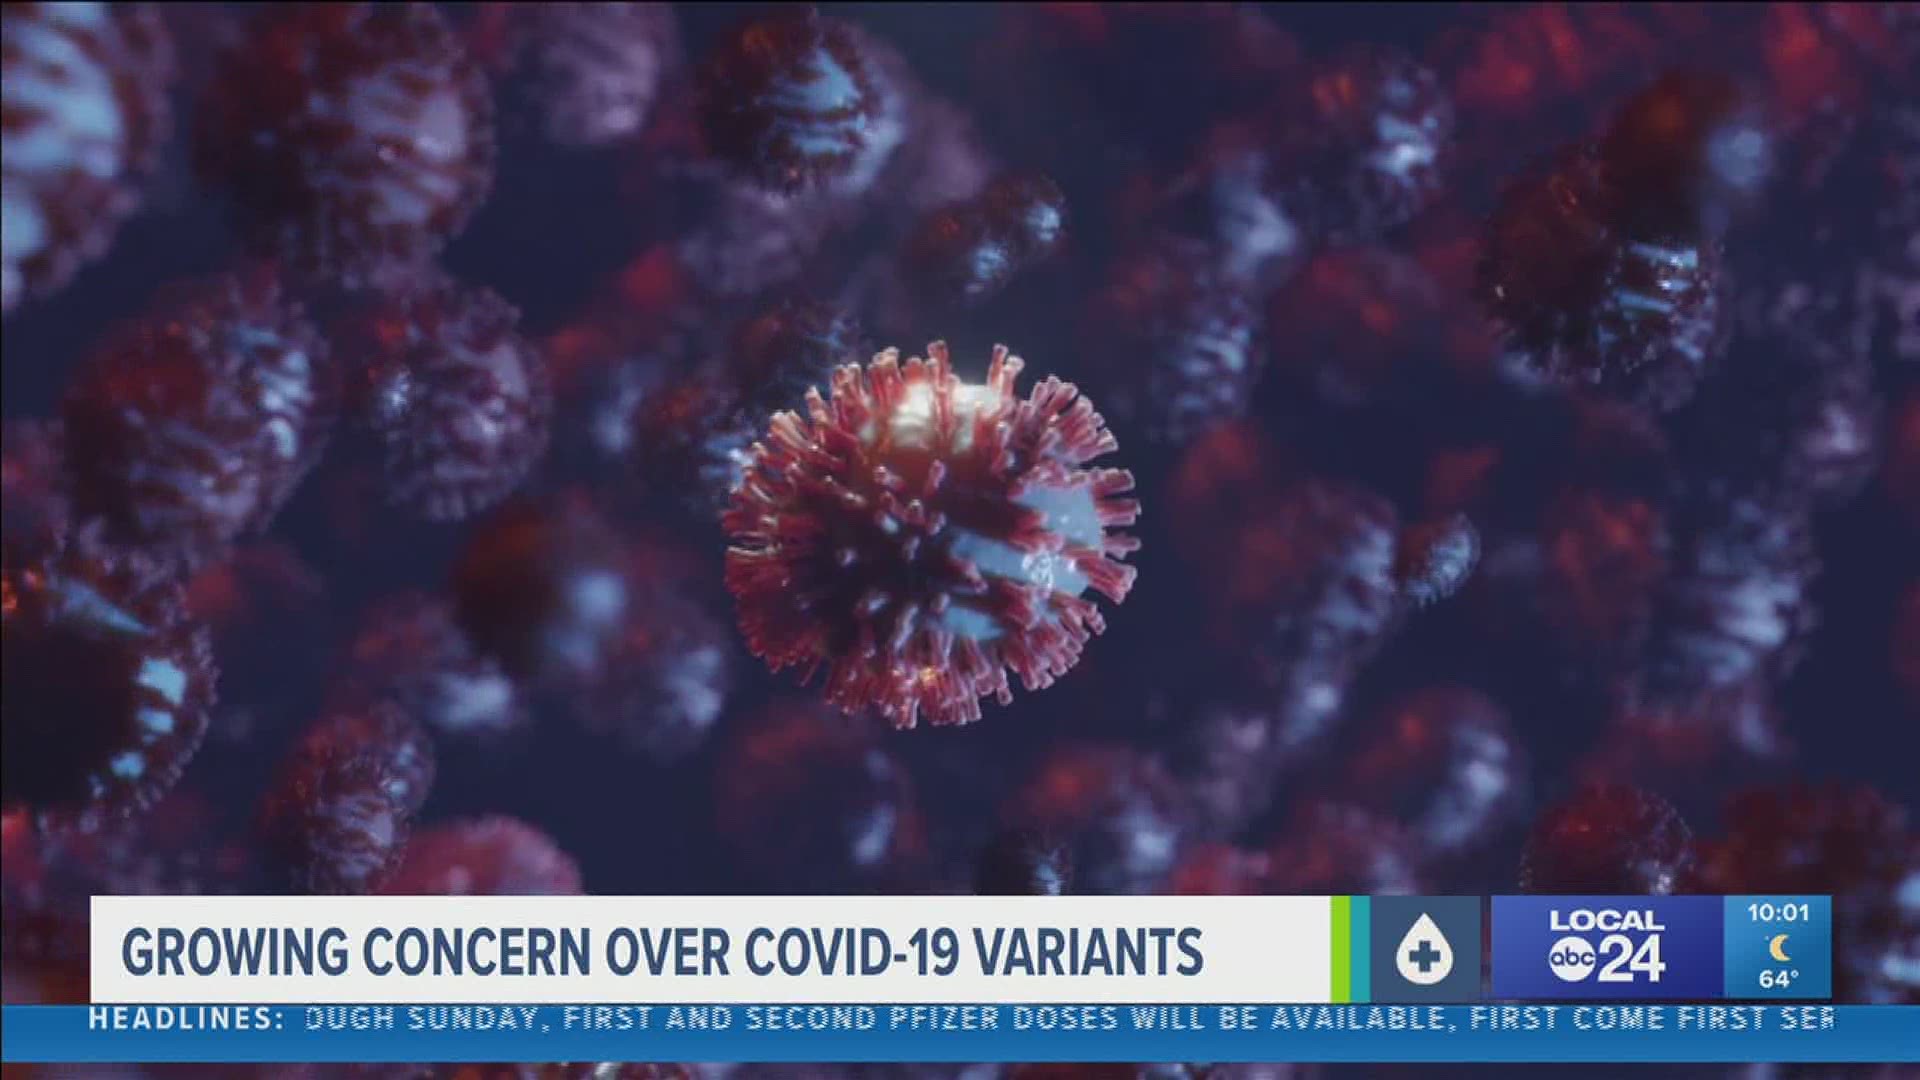 “The B.1.1.7 variant of COVID-19 has found to be more contagious and more effective. That’s what’s being more worrisome,” said Dr. Kimberly Brown.